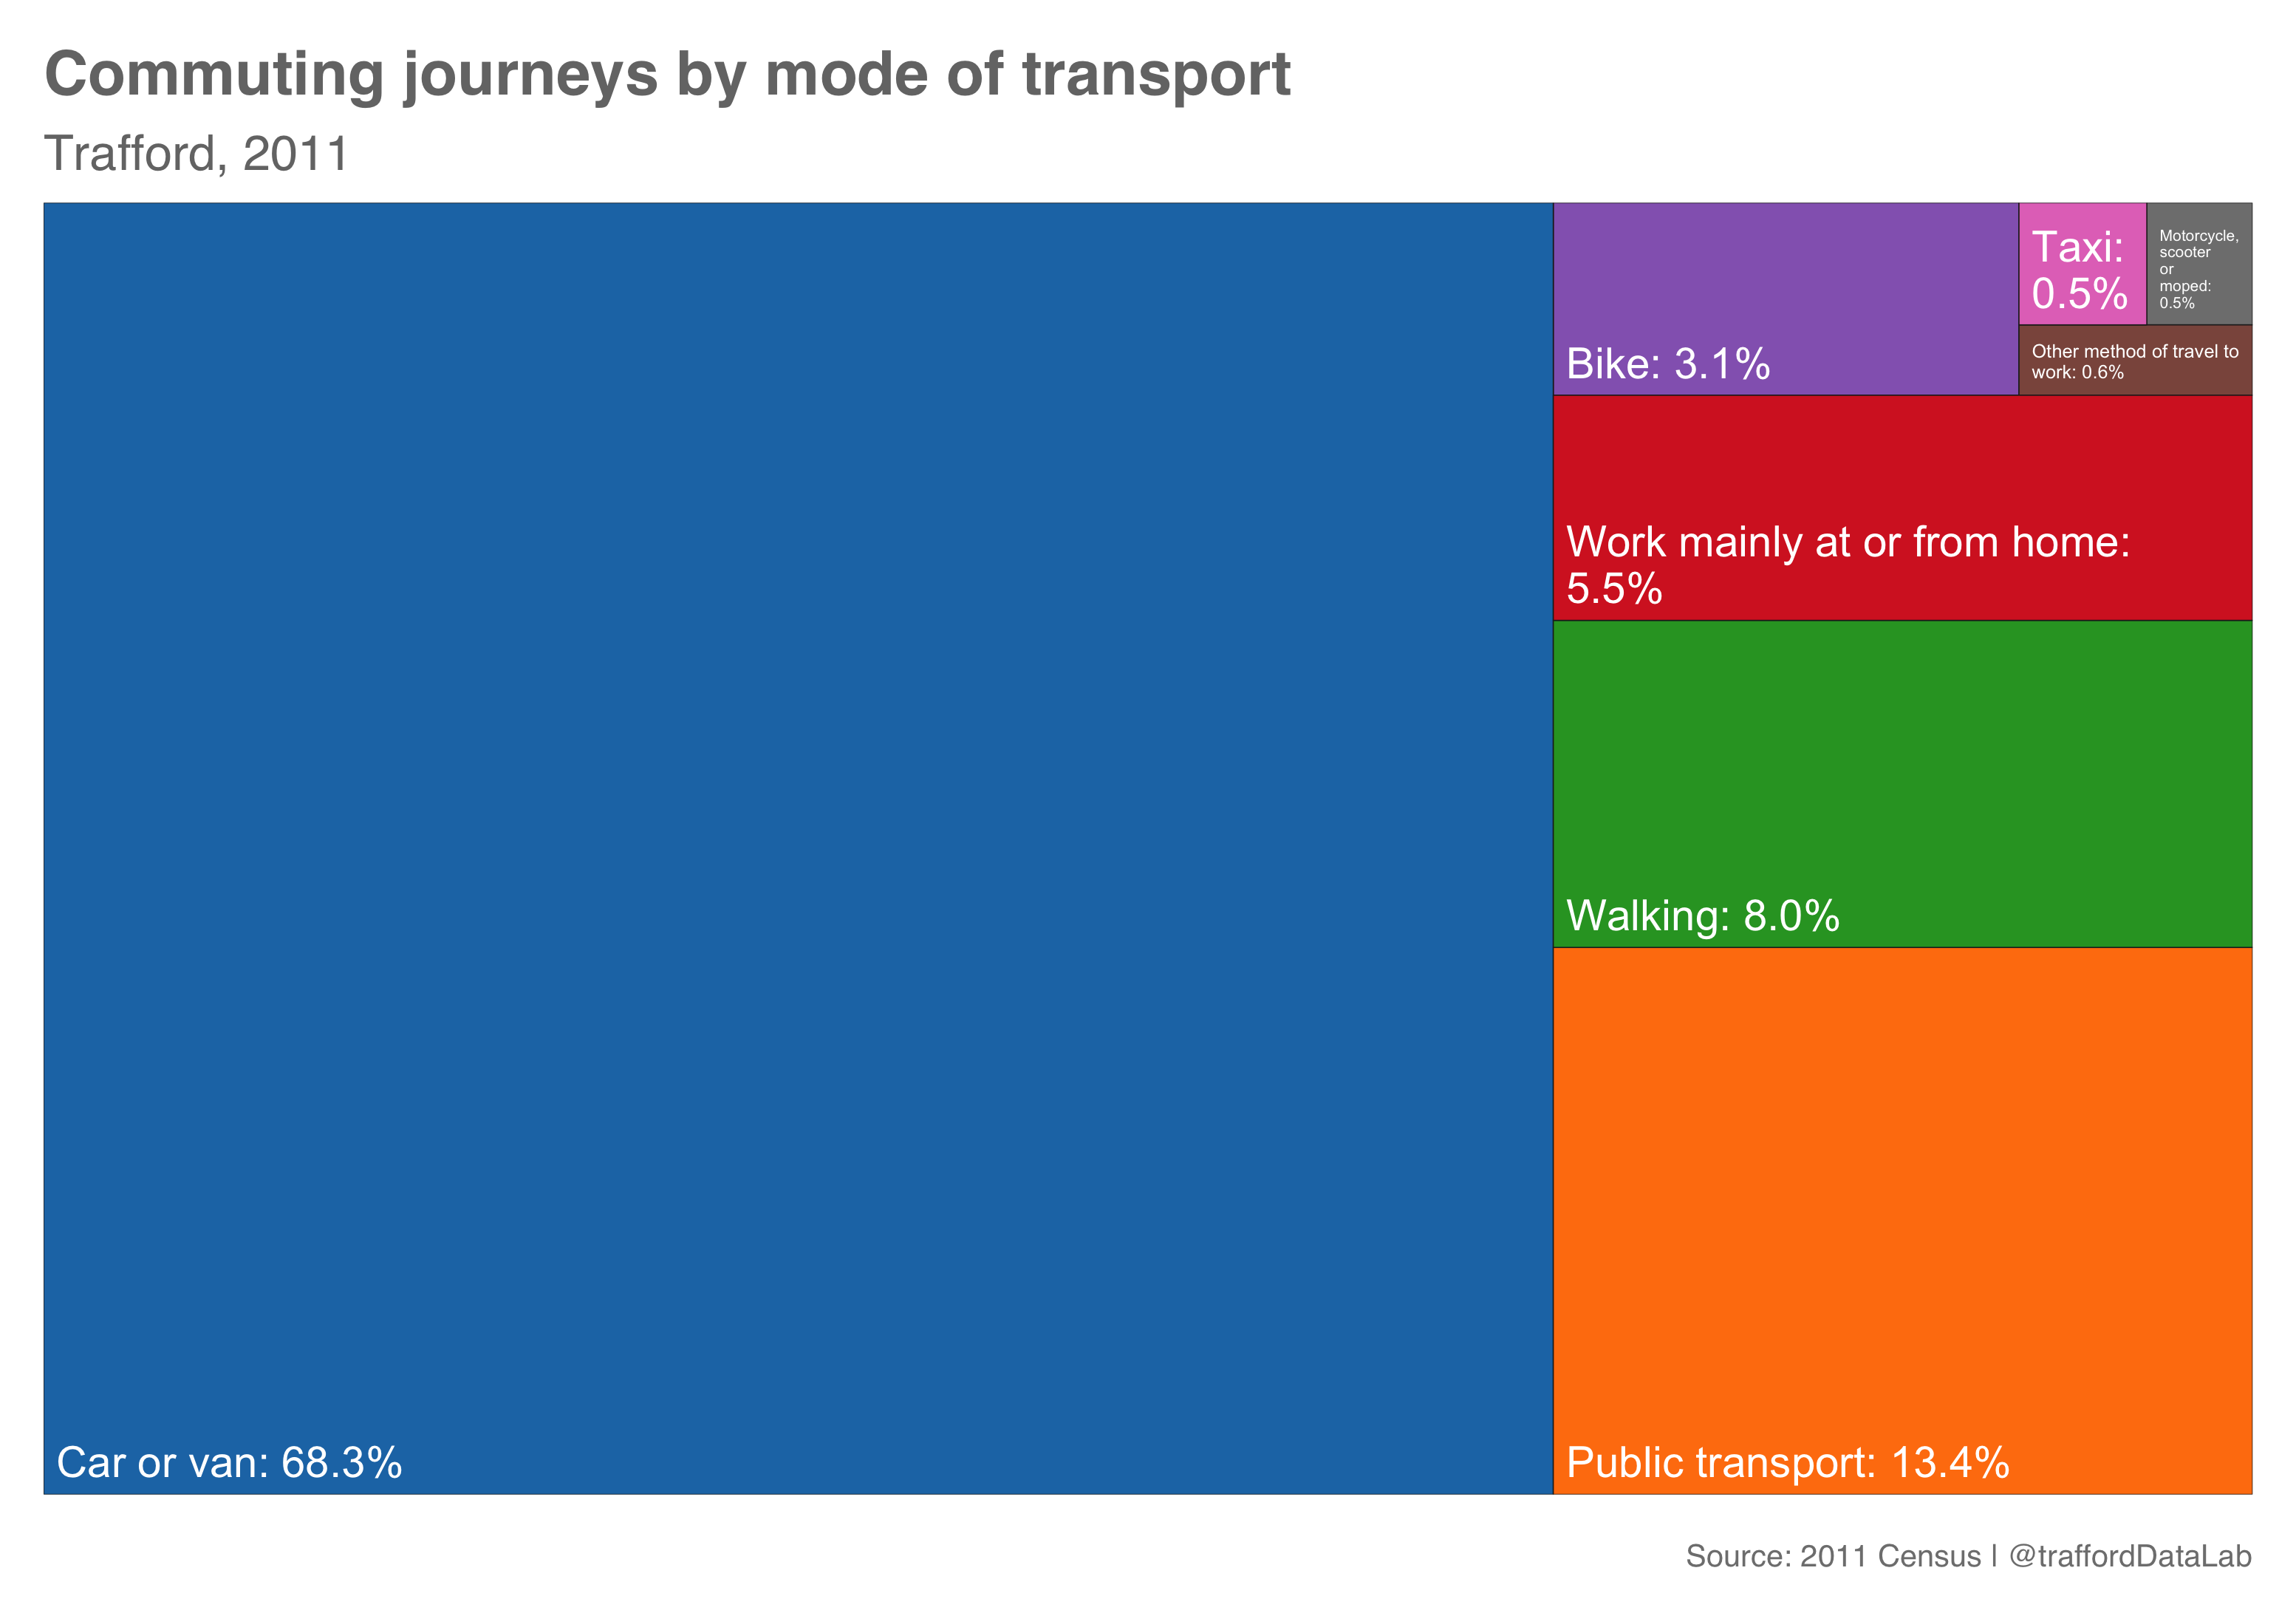 Commuting journeys by mode of transport in Trafford, 2011.